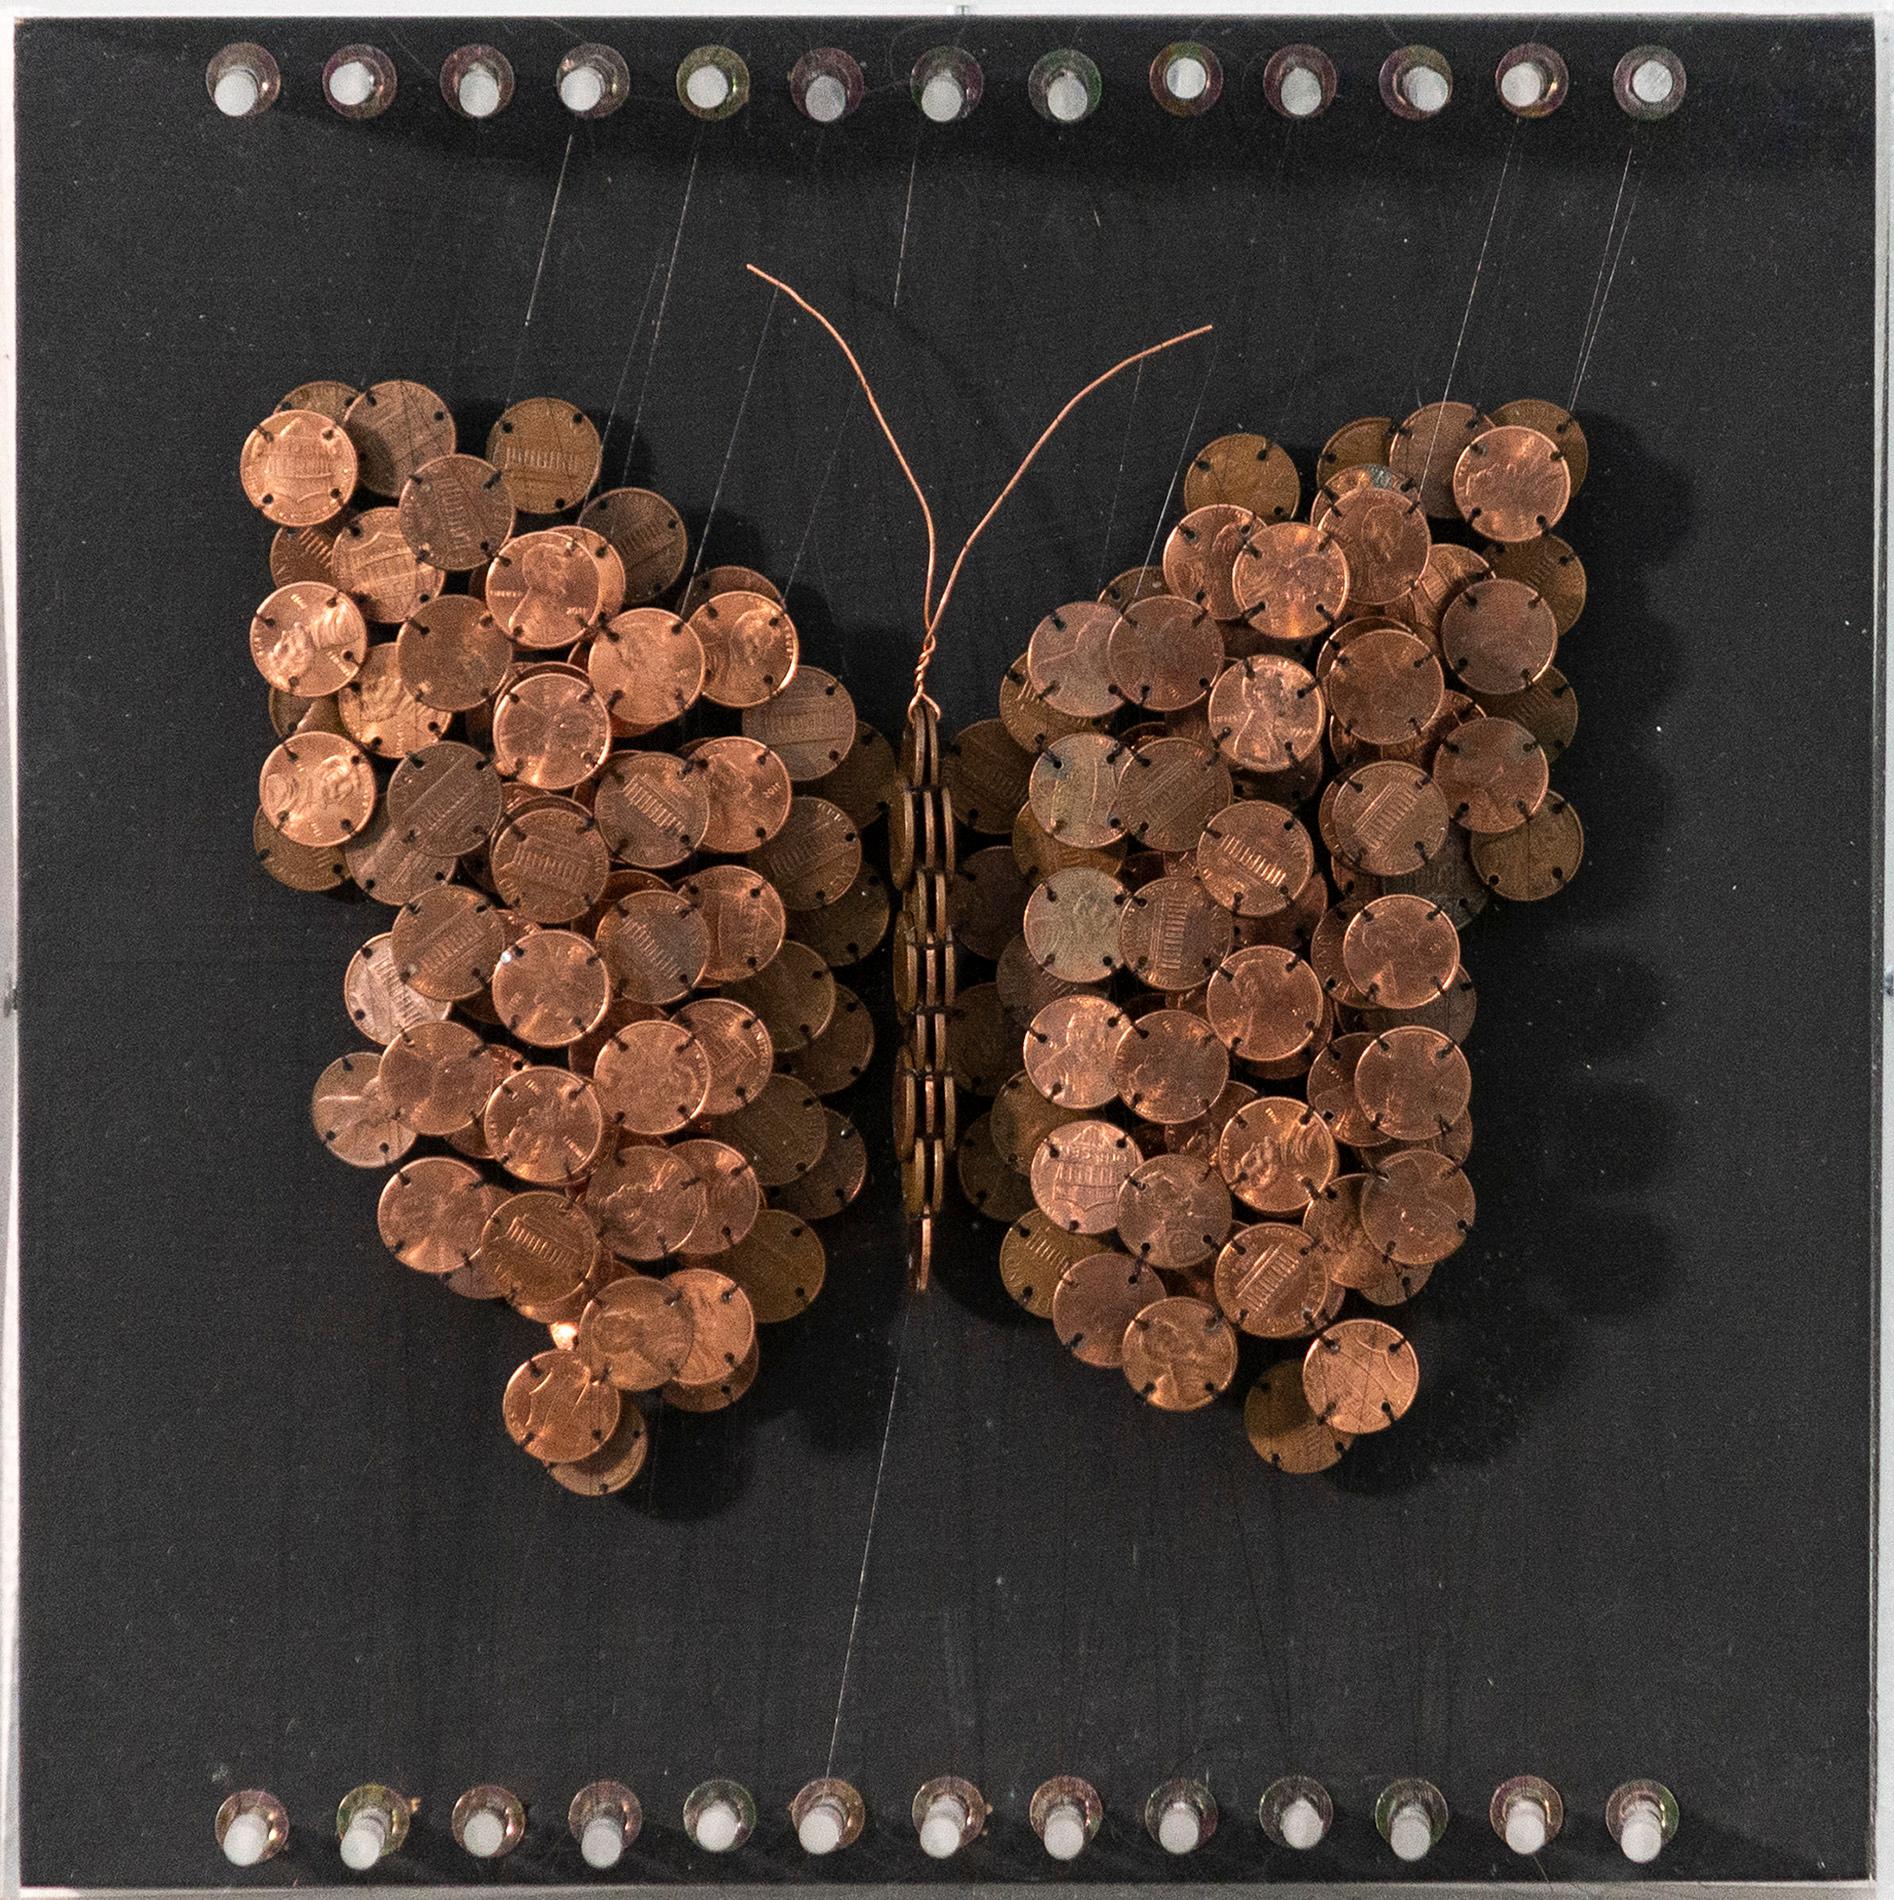 More Than Butterflies 2 of 2 - coins, figurative, mixed media, wall sculpture - Mixed Media Art by Raymond Waters